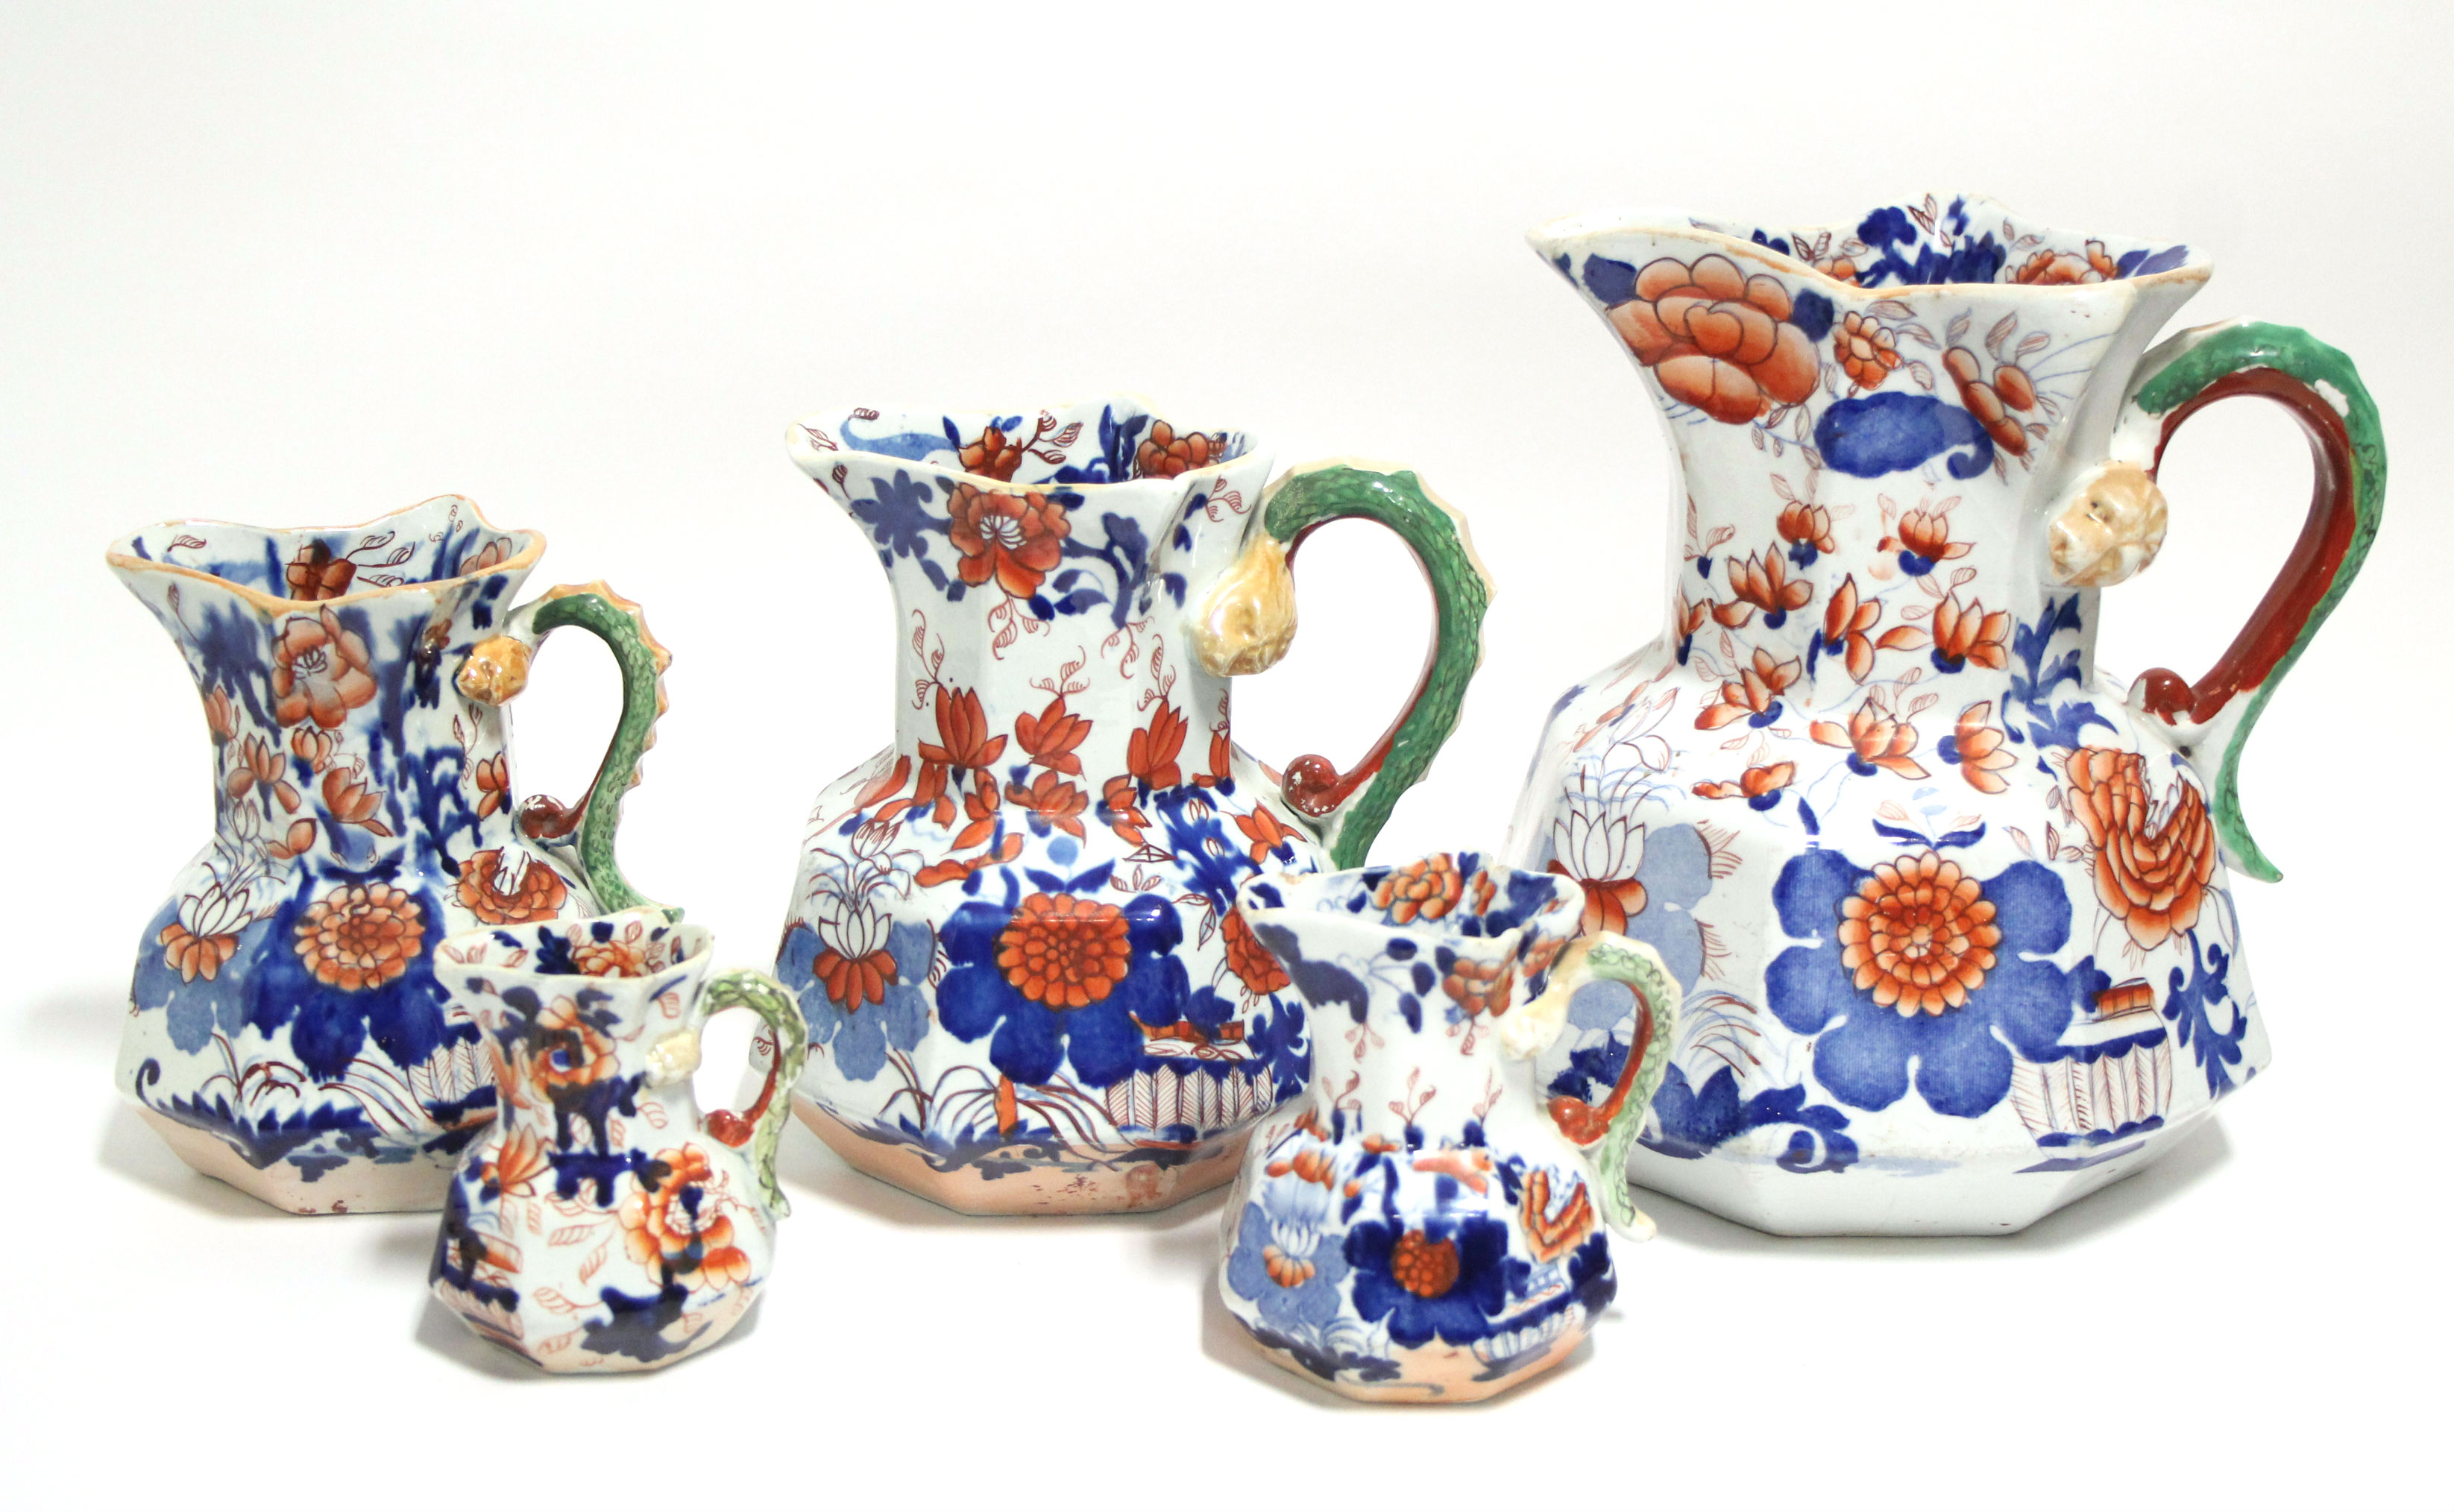 A matched graduated set of five early Mason's Ironstone octagonal baluster "Hydra" jugs with